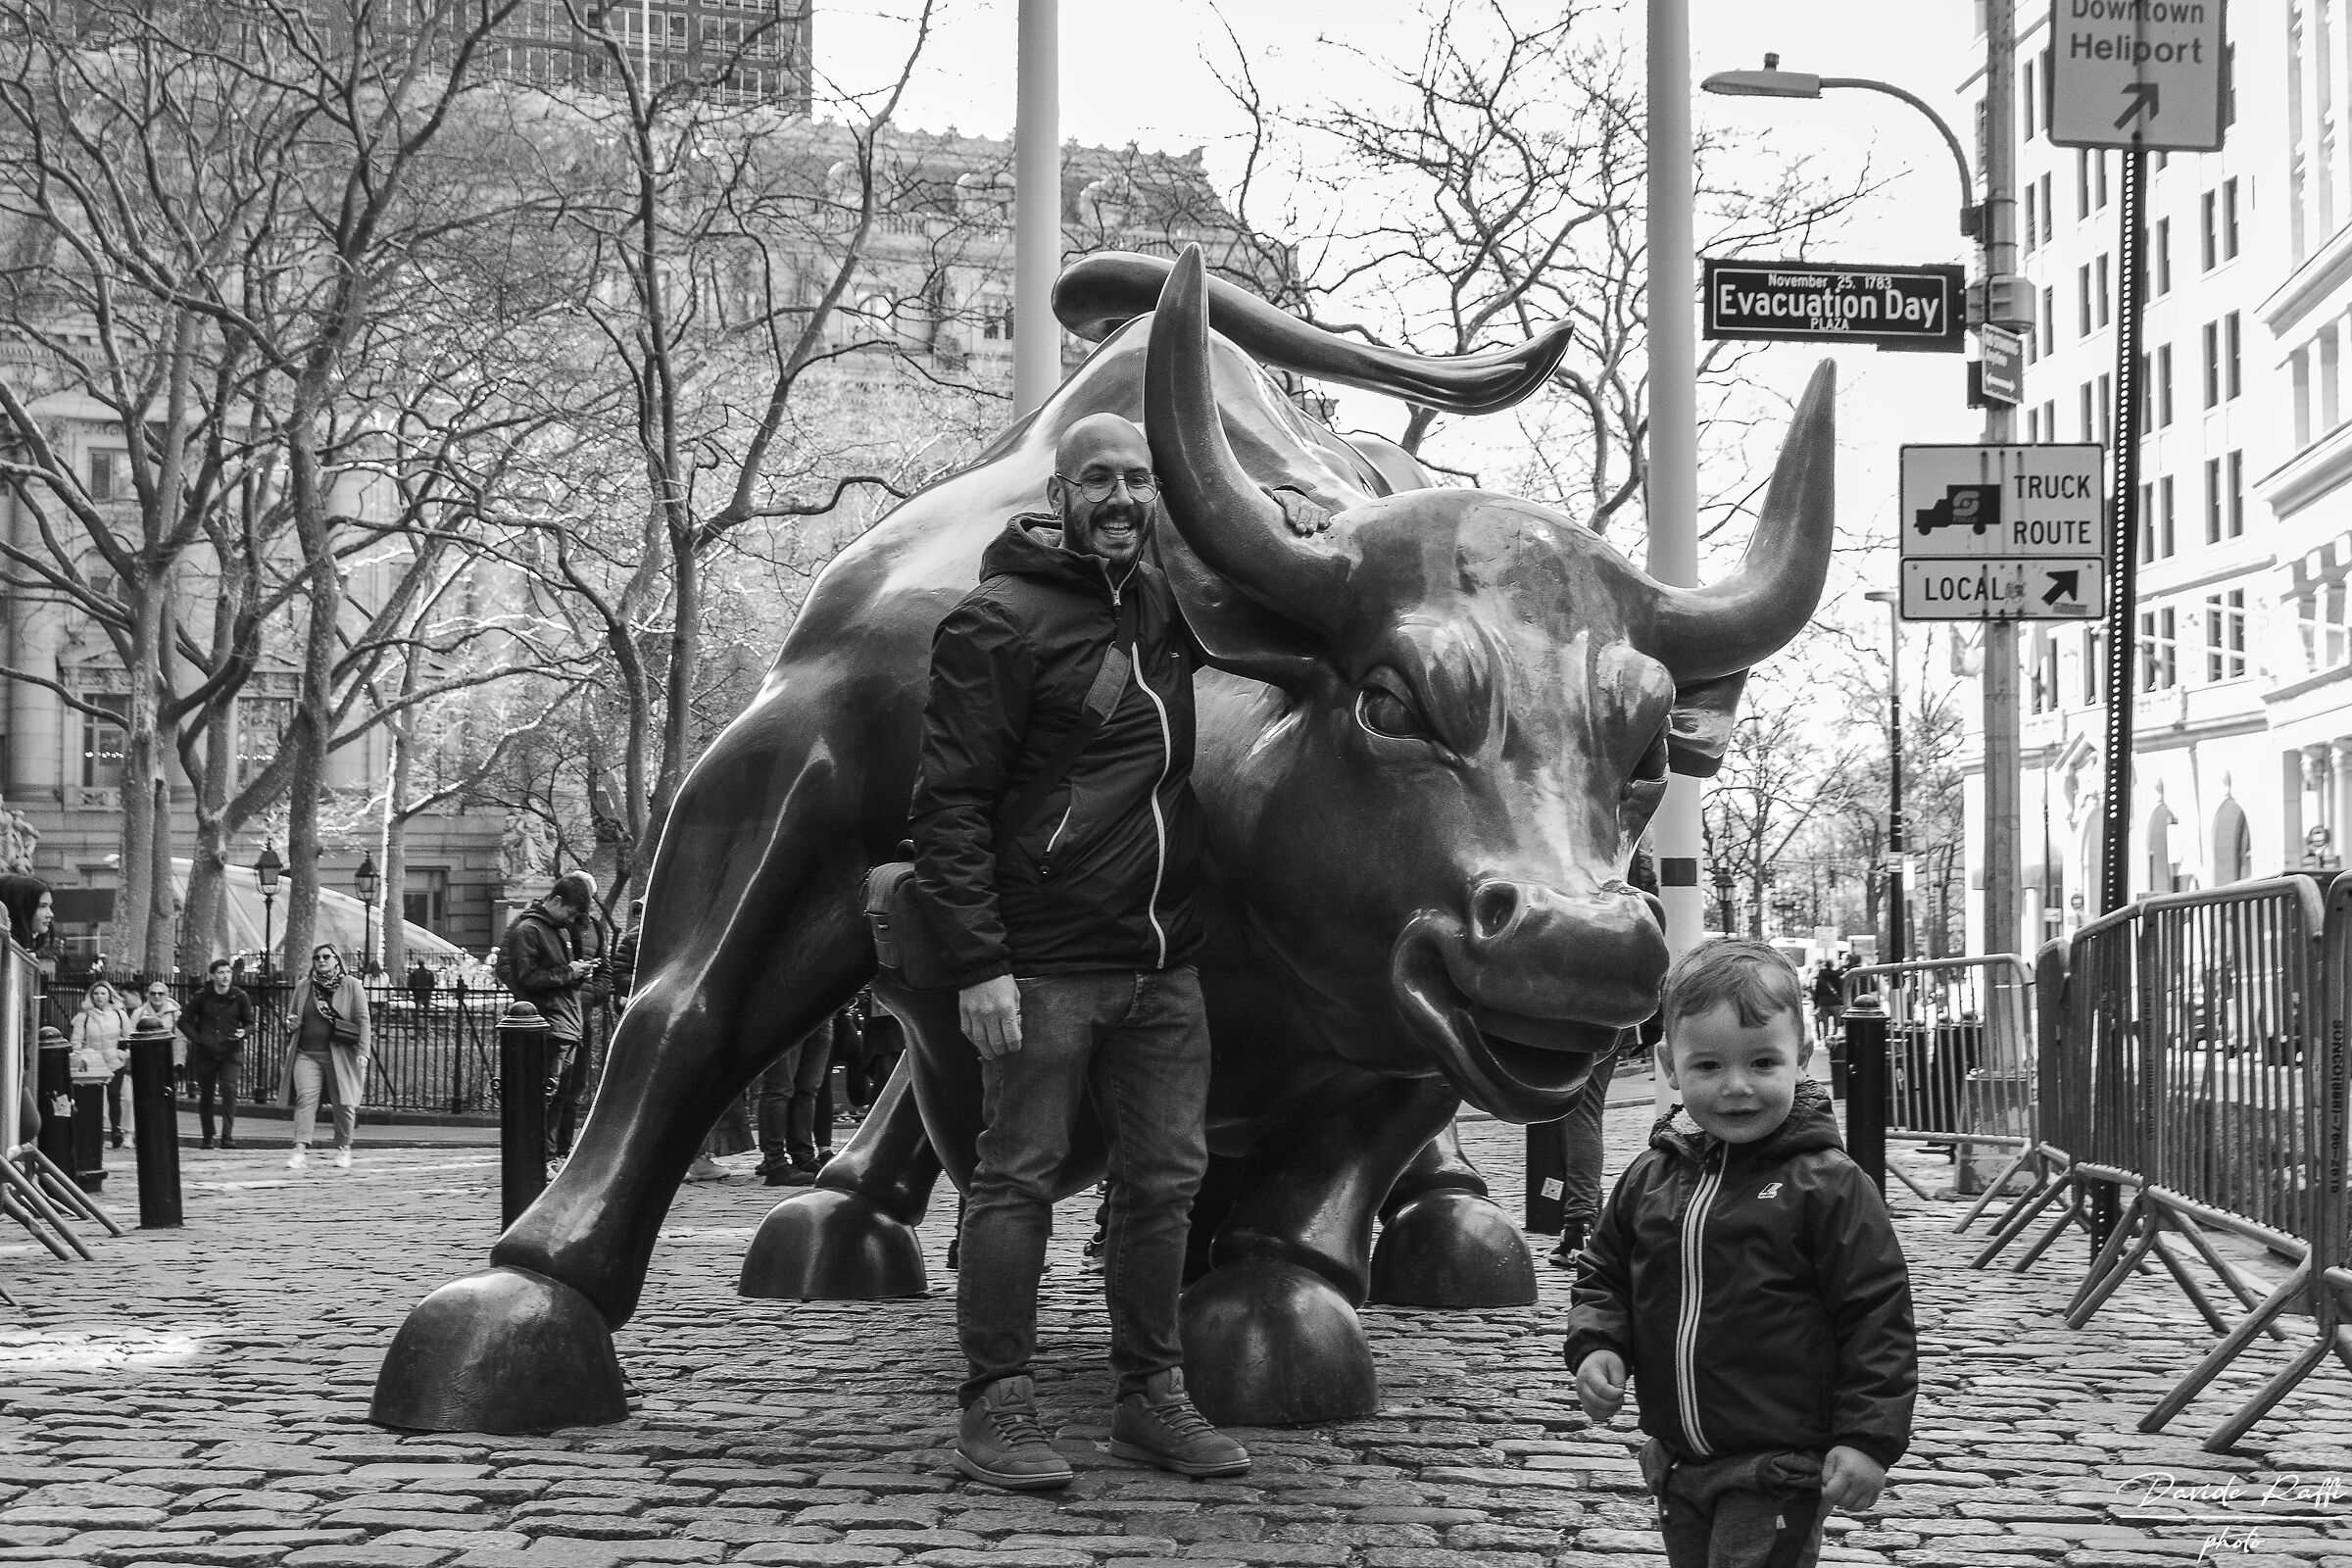 the bull of Wall Street...